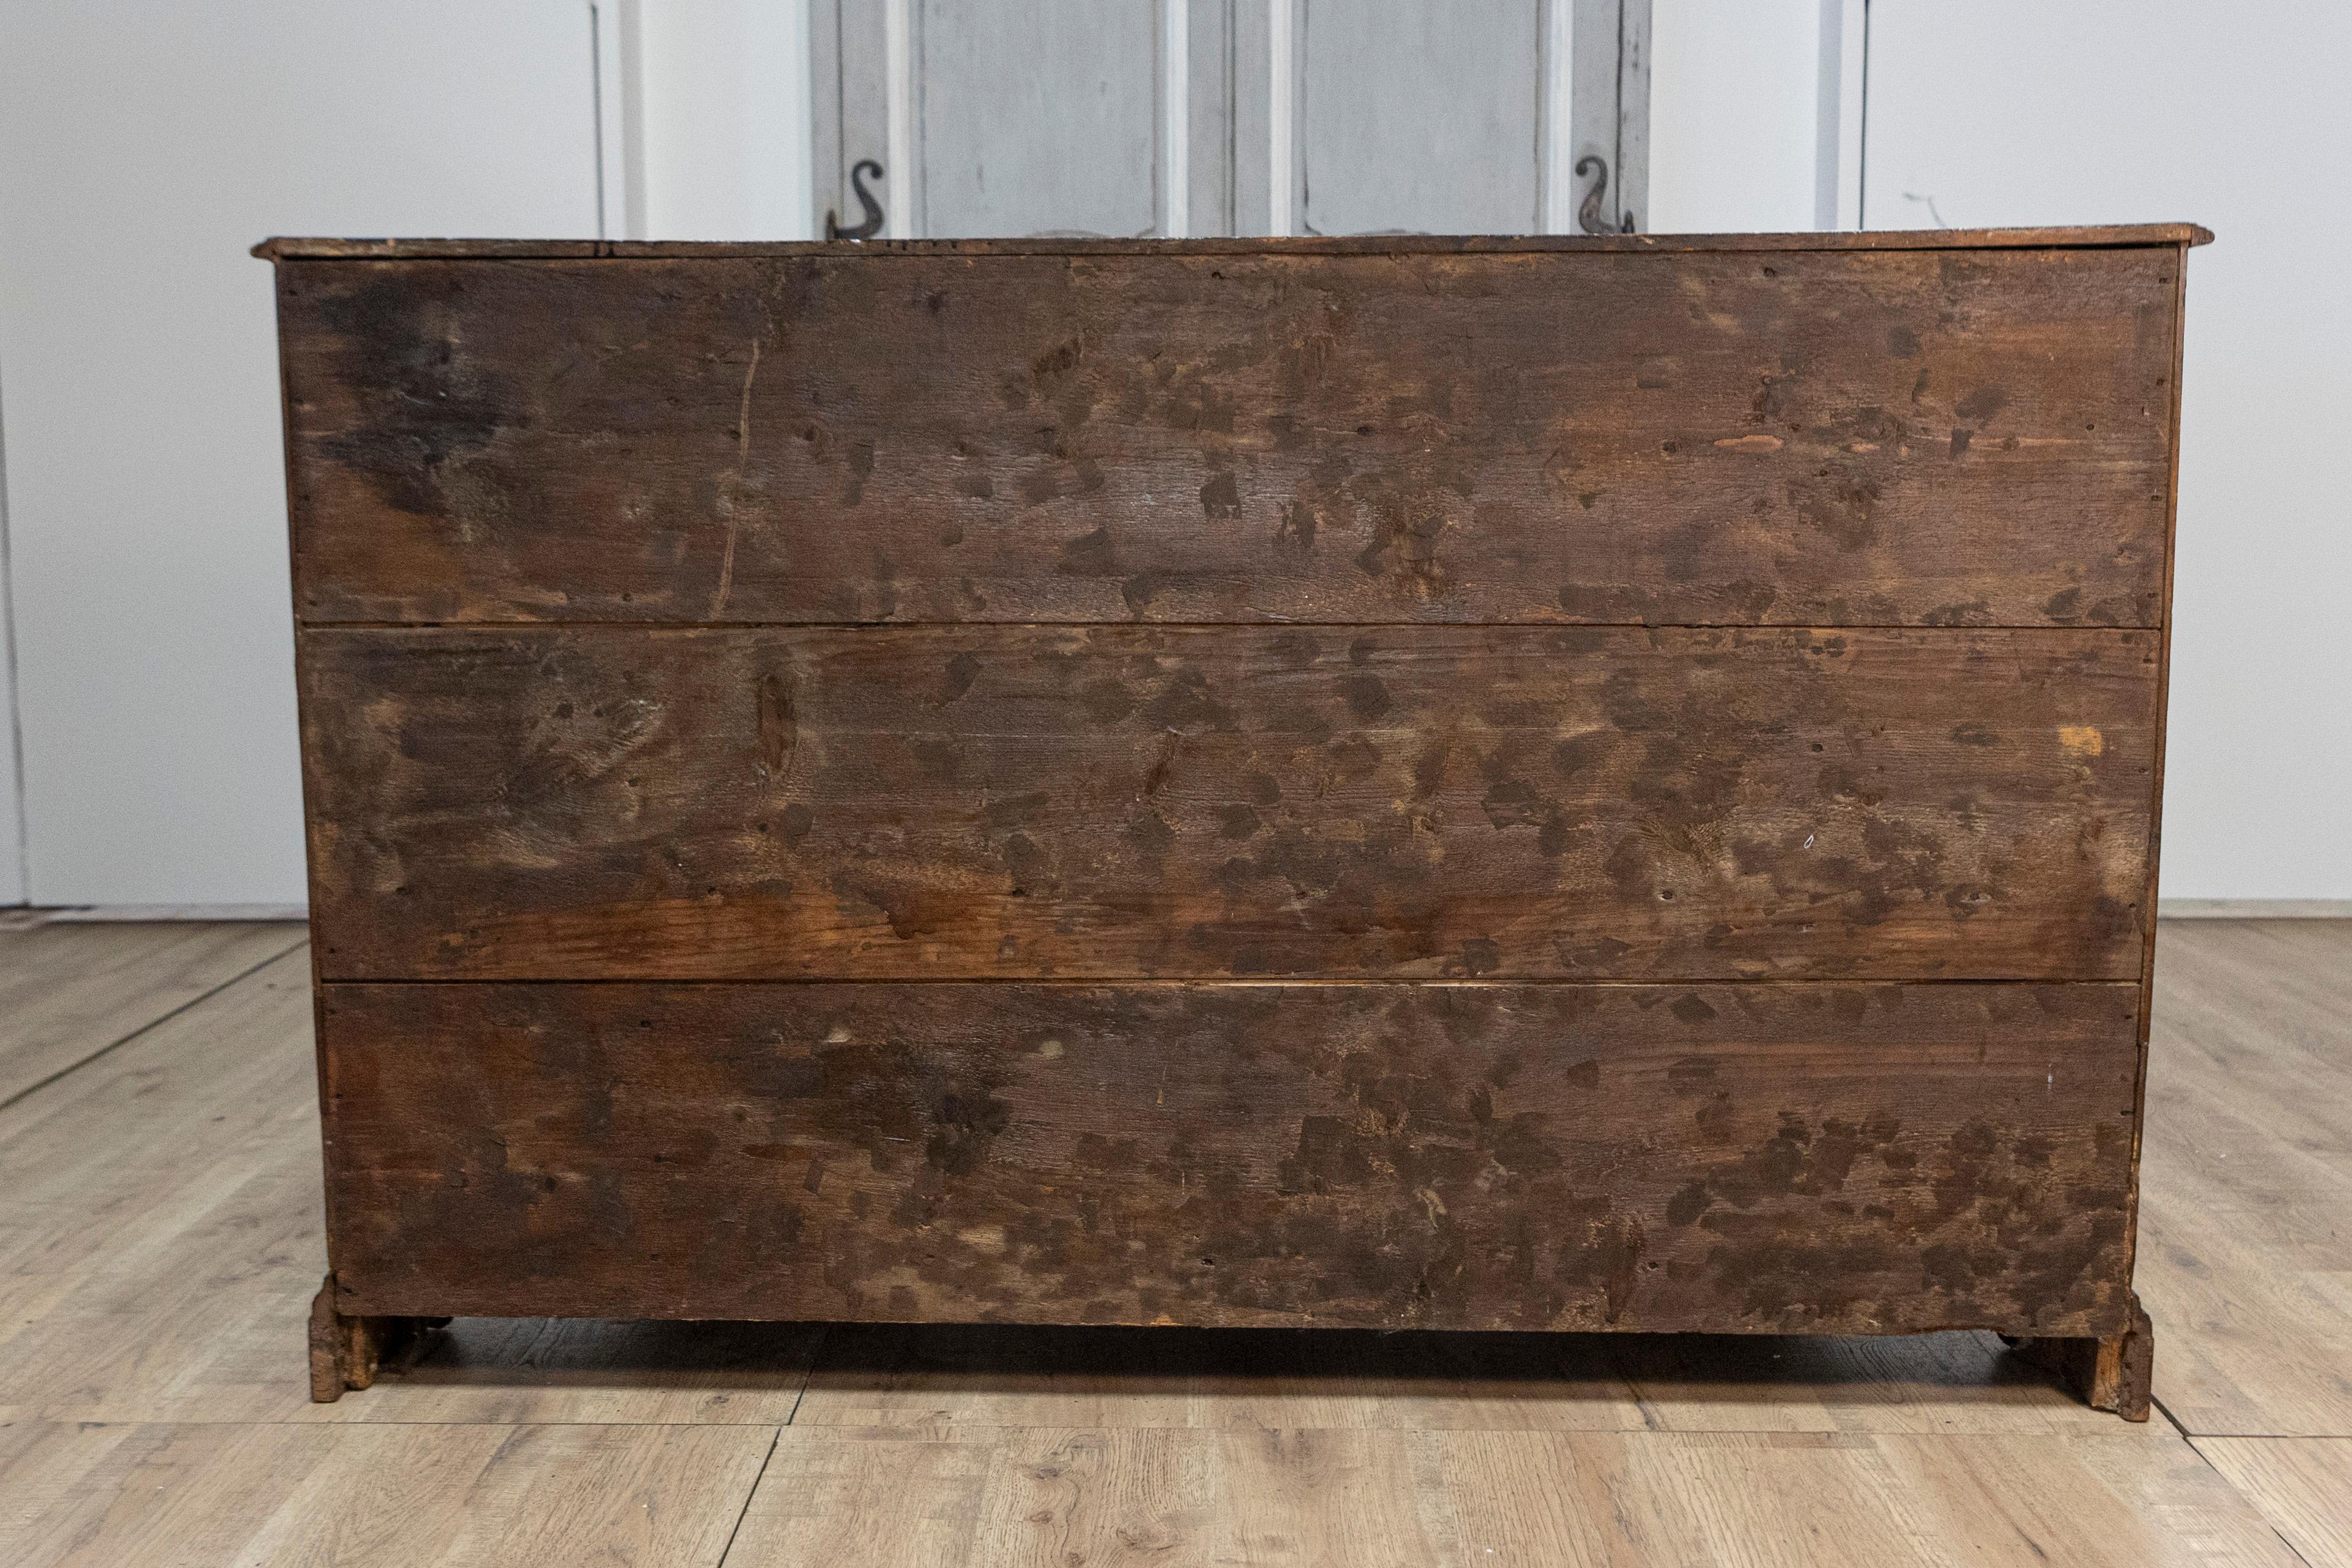  Venetian 19th Century Walnut Credenza with Canted Sides, Drawers and Doors For Sale 5